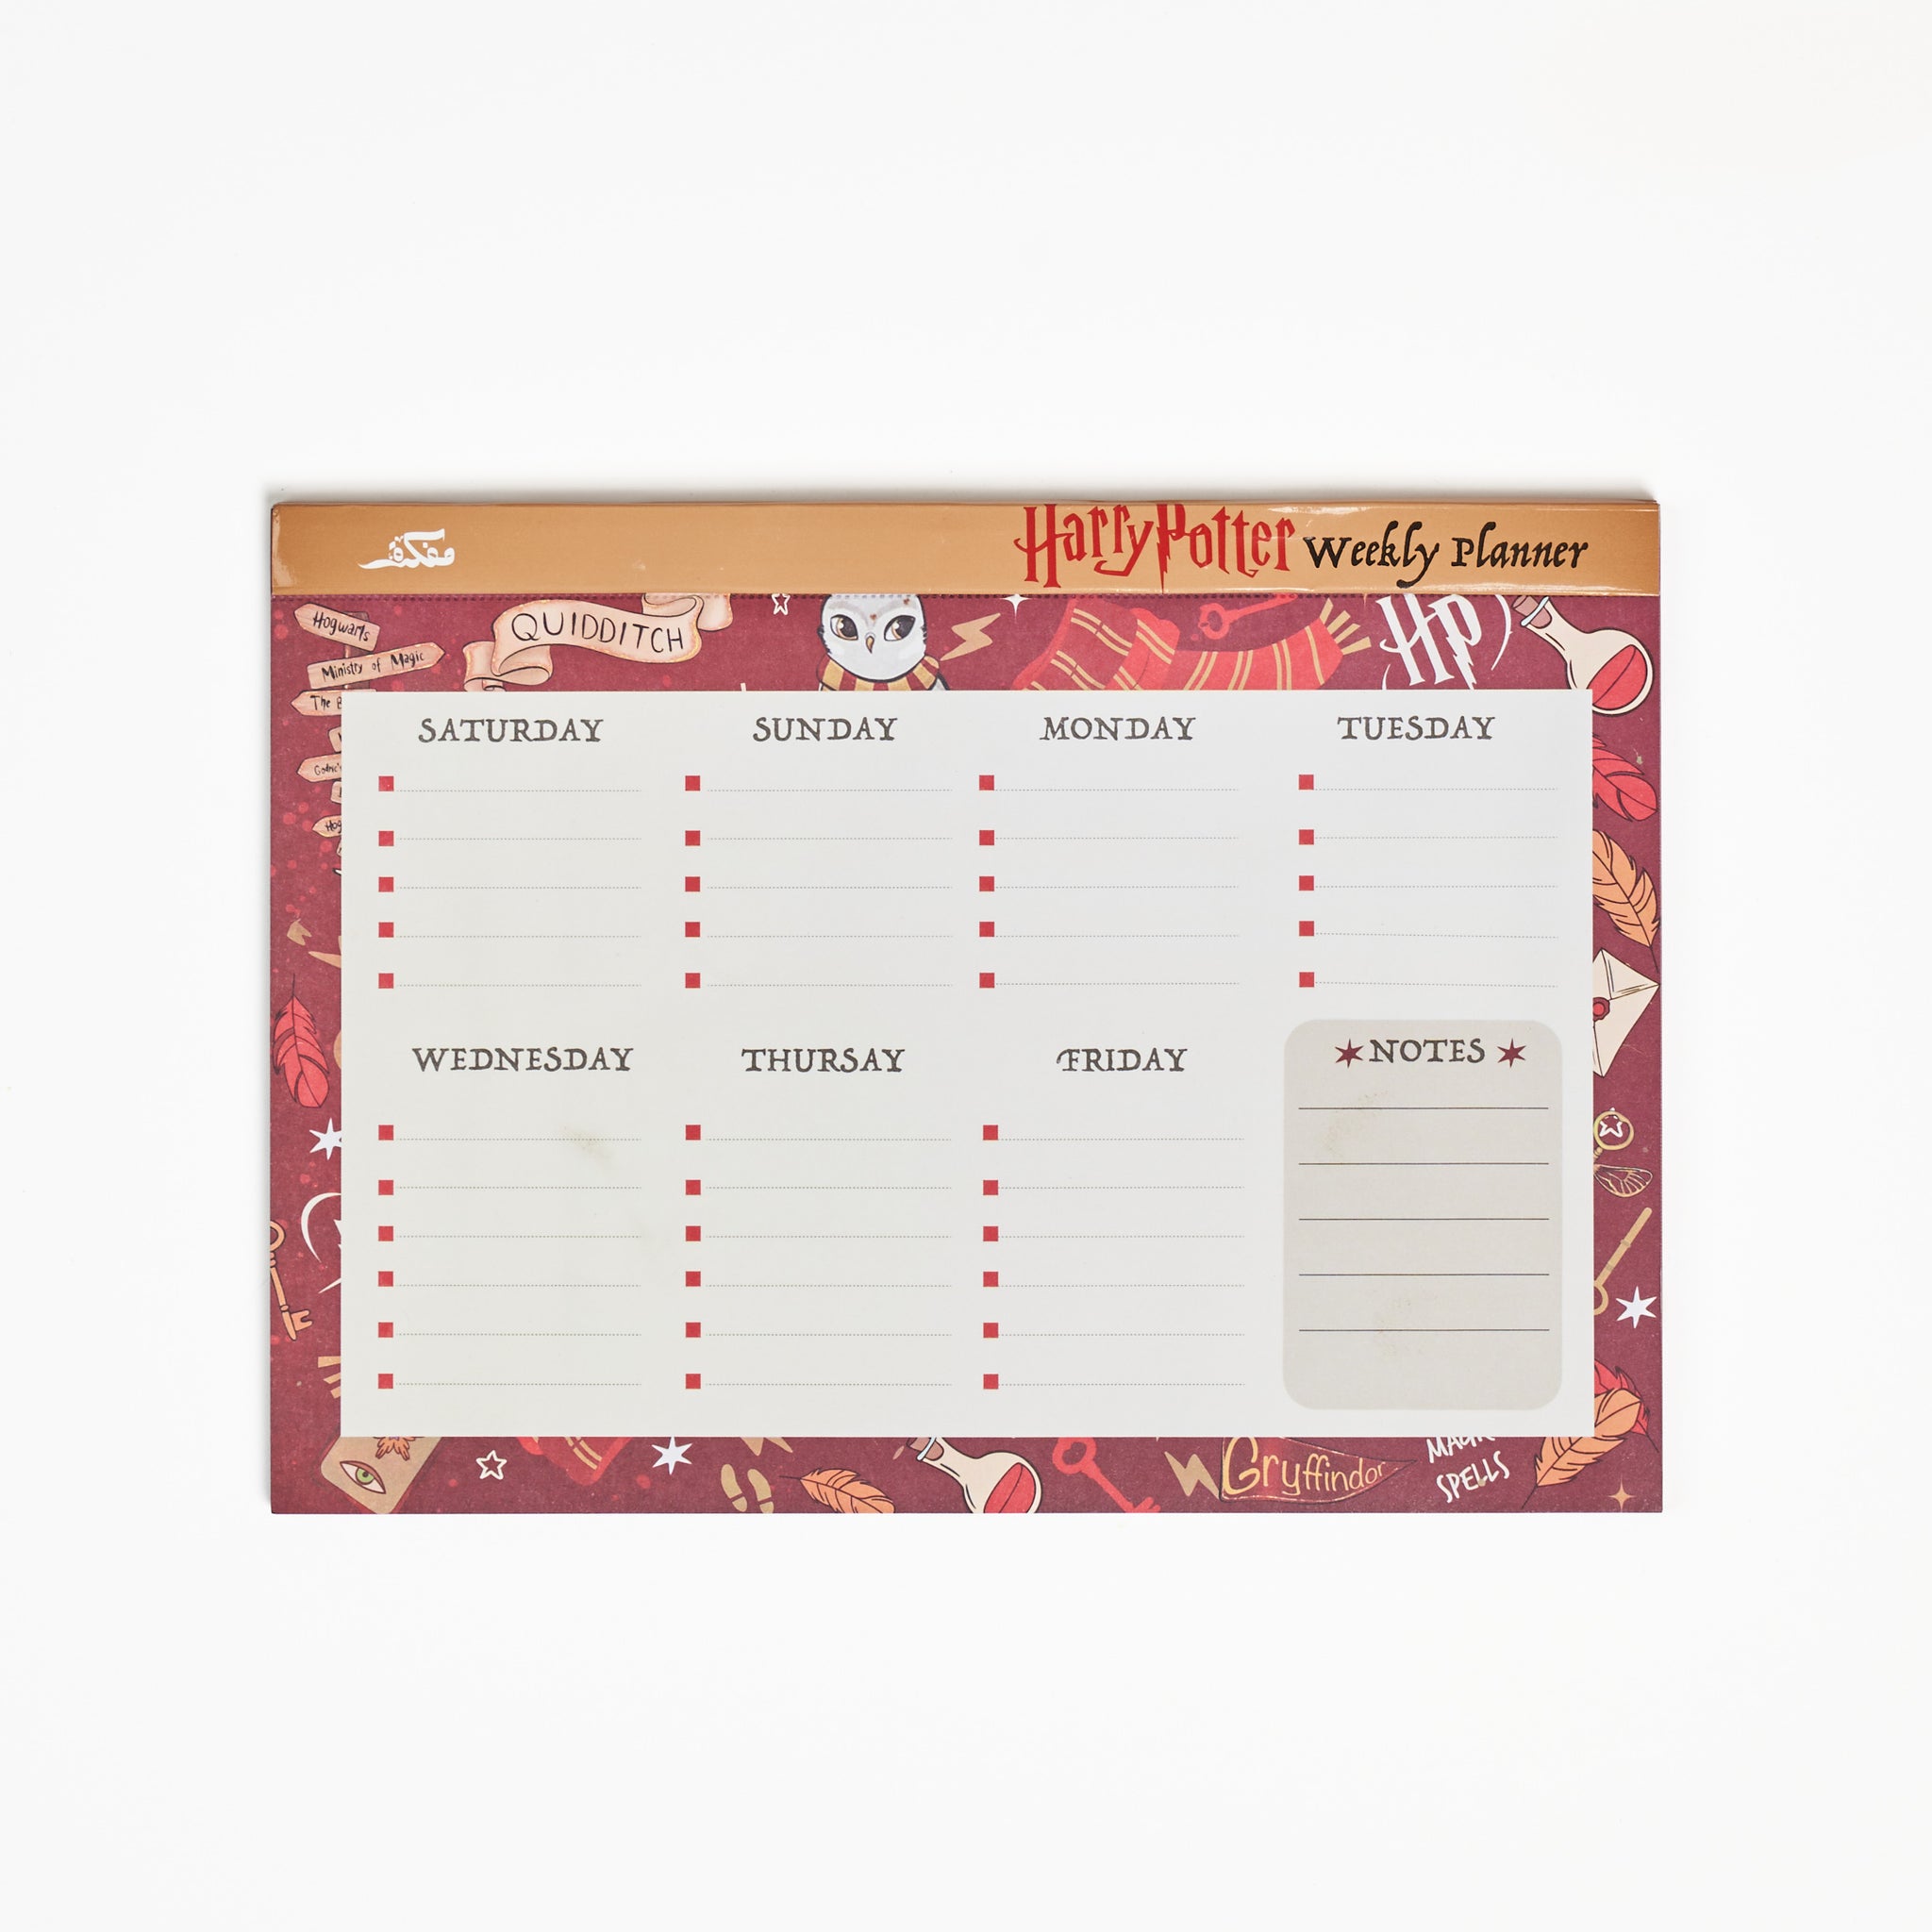 Harry Potter Weekly planner